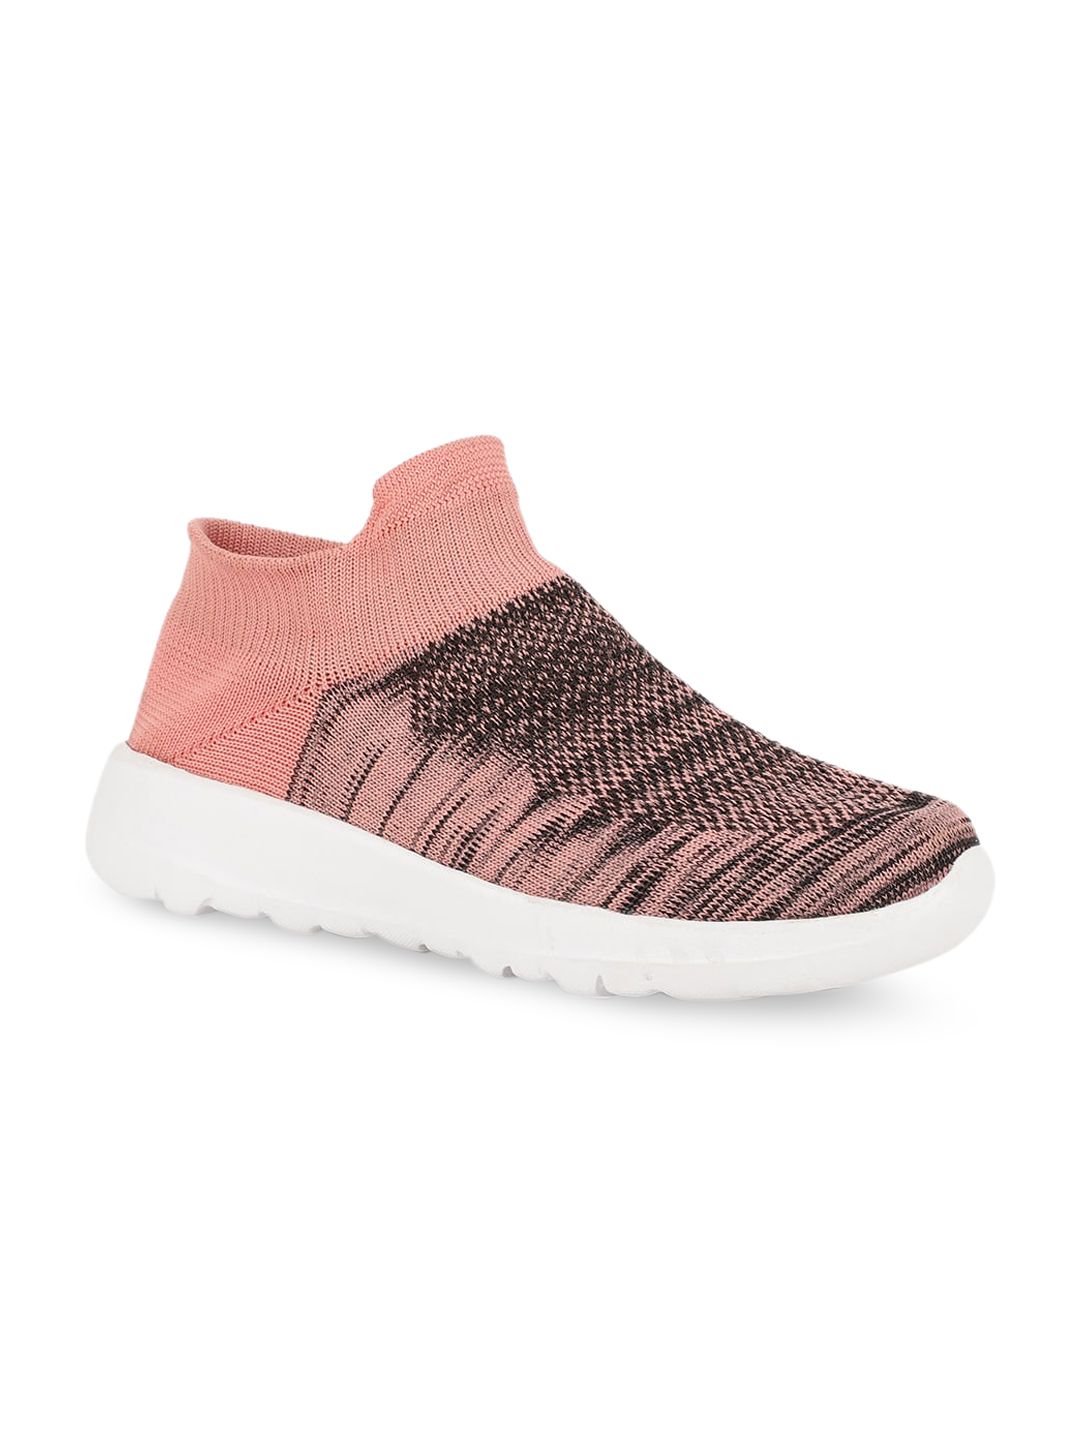 HERE&NOW Women Nude-Coloured & Black Woven Design Slip-On Sneakers Price in India